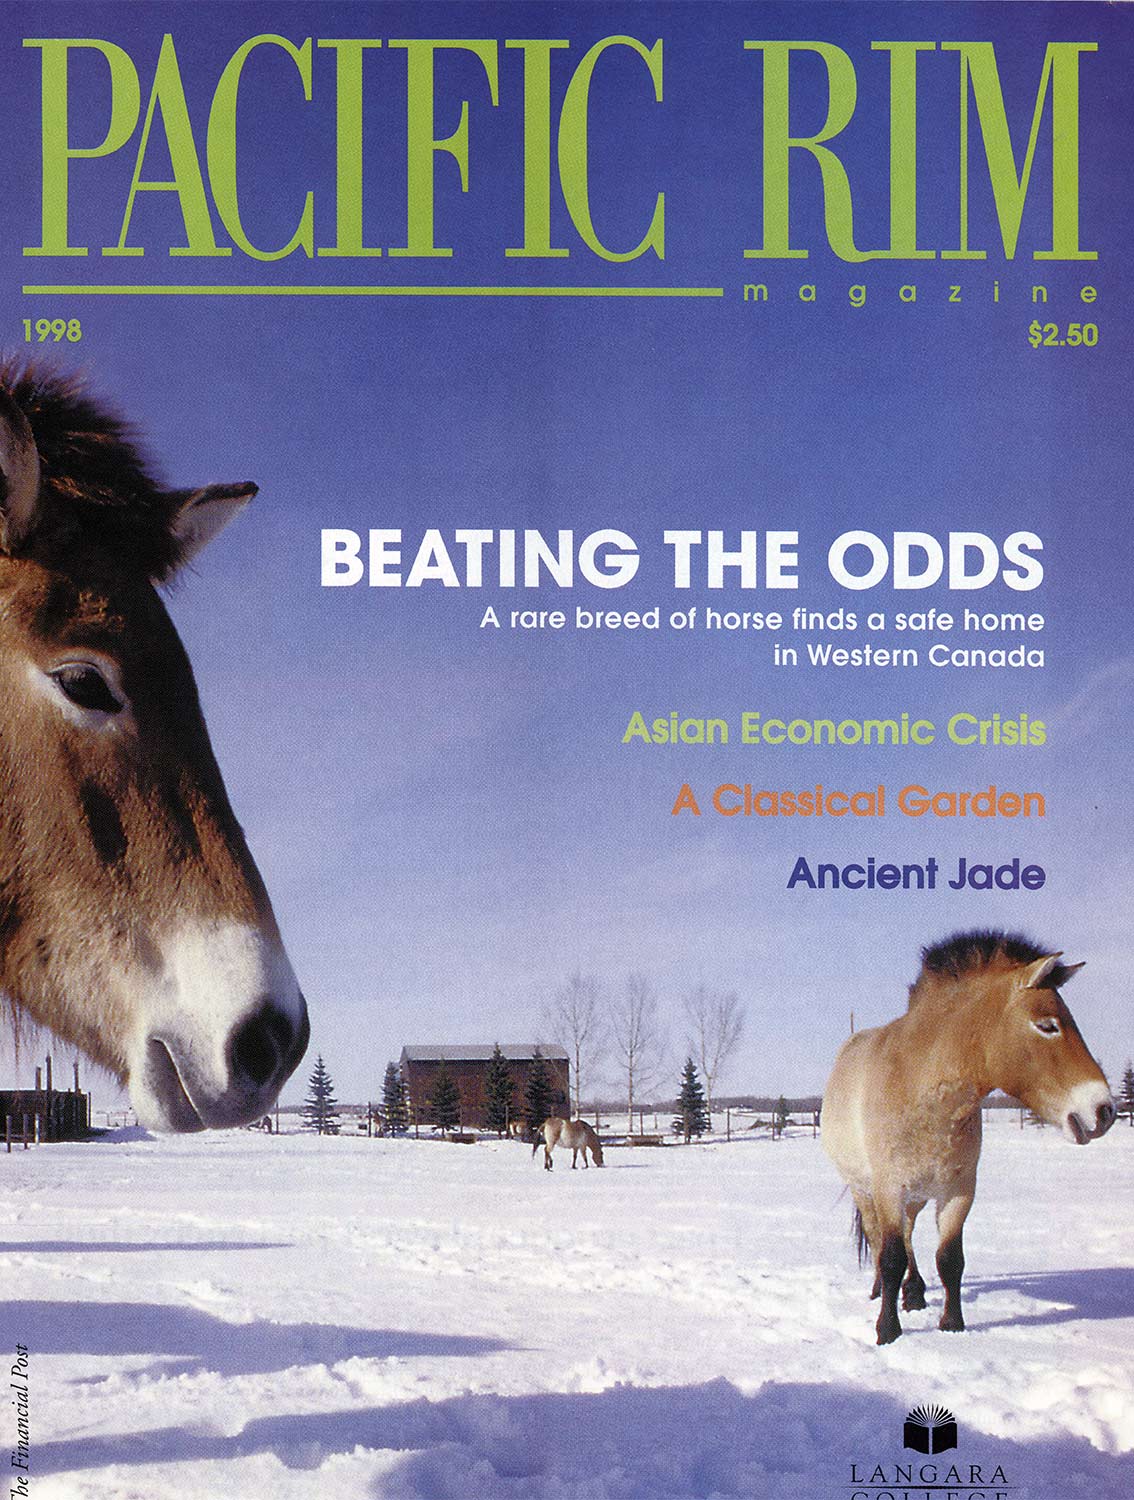 1998 Pacific Rim Cover. "Beating the odds." Cover Story. Image of rare horse breeds.